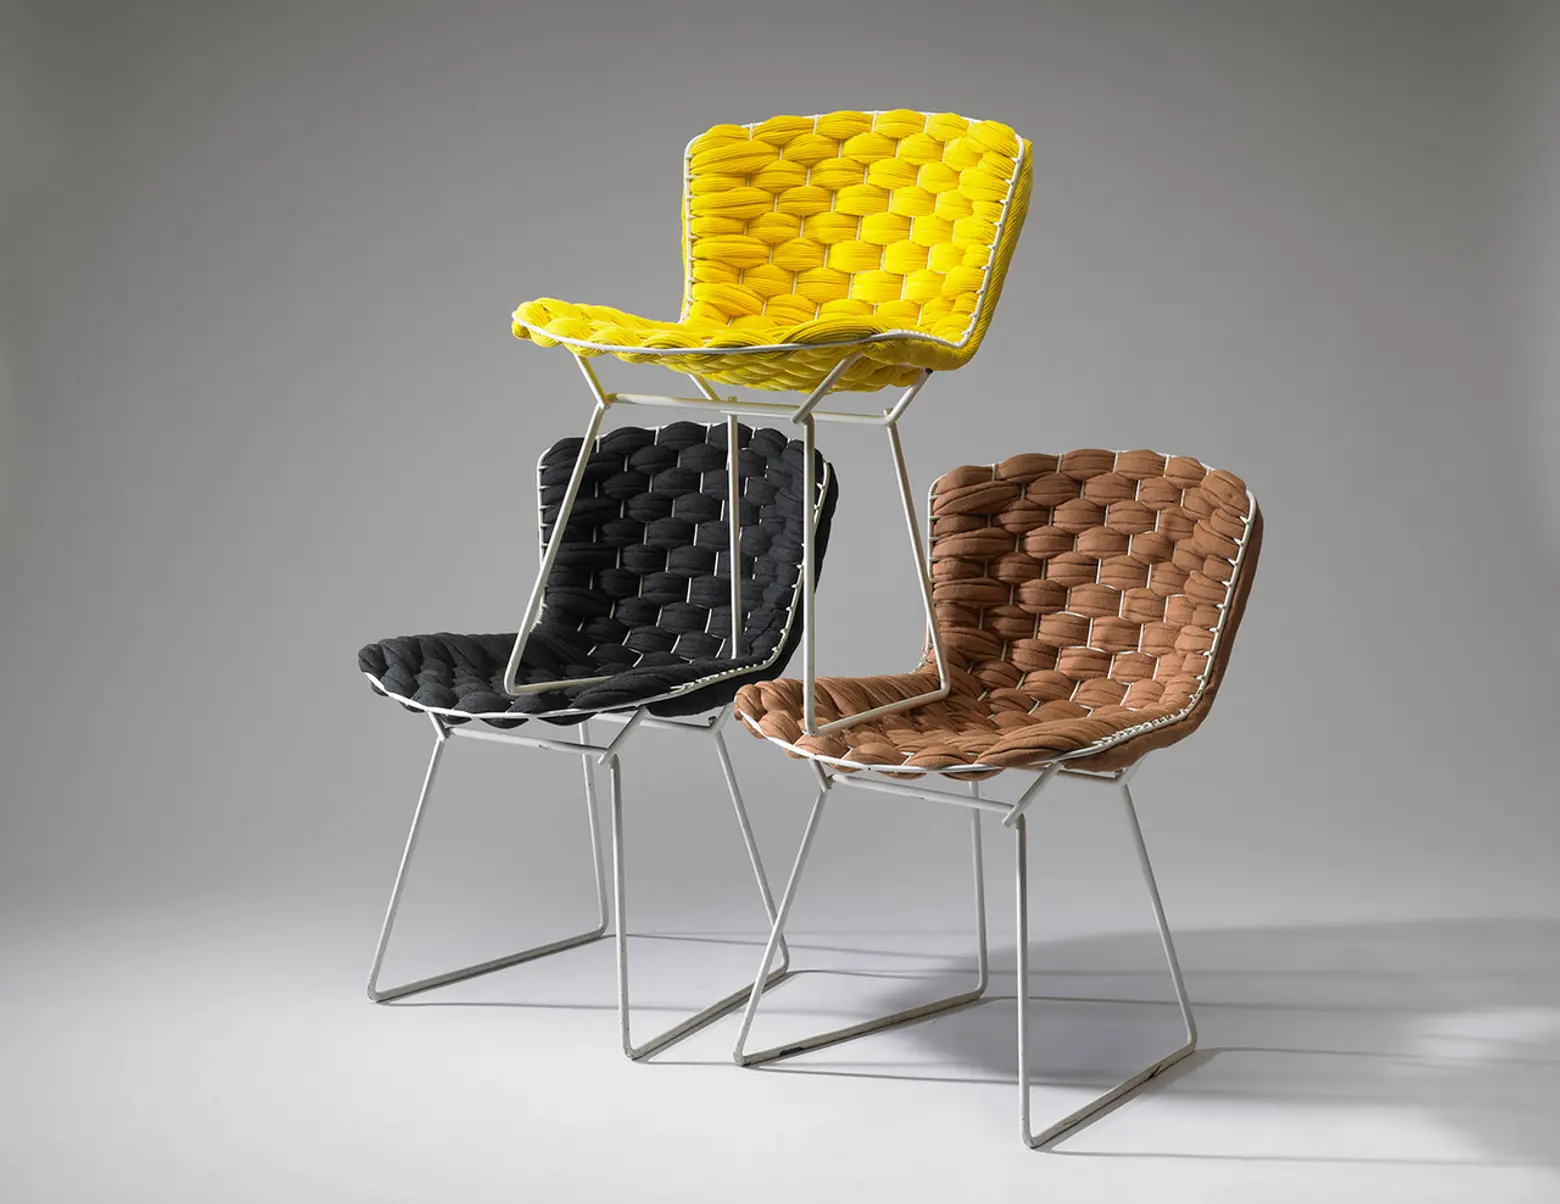 French design, Clément Brazille, Bertoia chairs, classic with a twist, classic redesign, woden fabric upholstery, Wire Chair, Bertoia Loom Chair